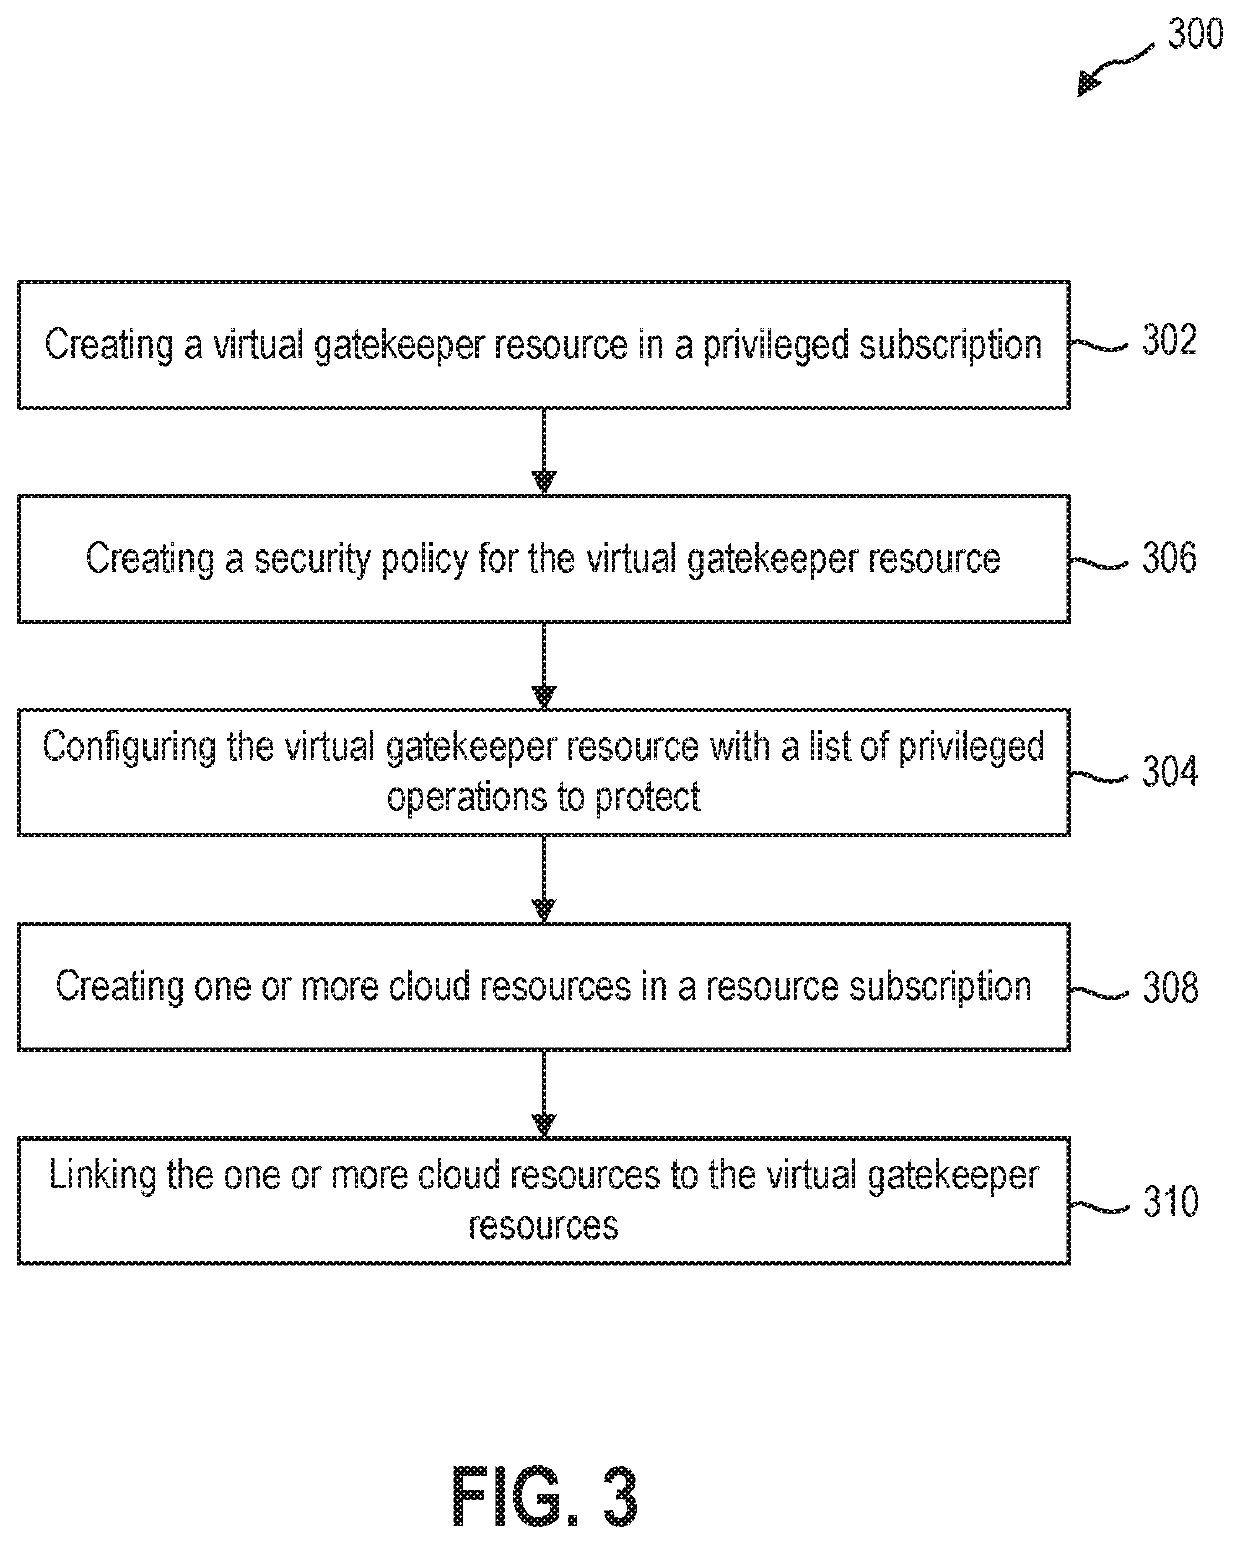 Gatekeeper resource to protect cloud resources against rogue insider attacks